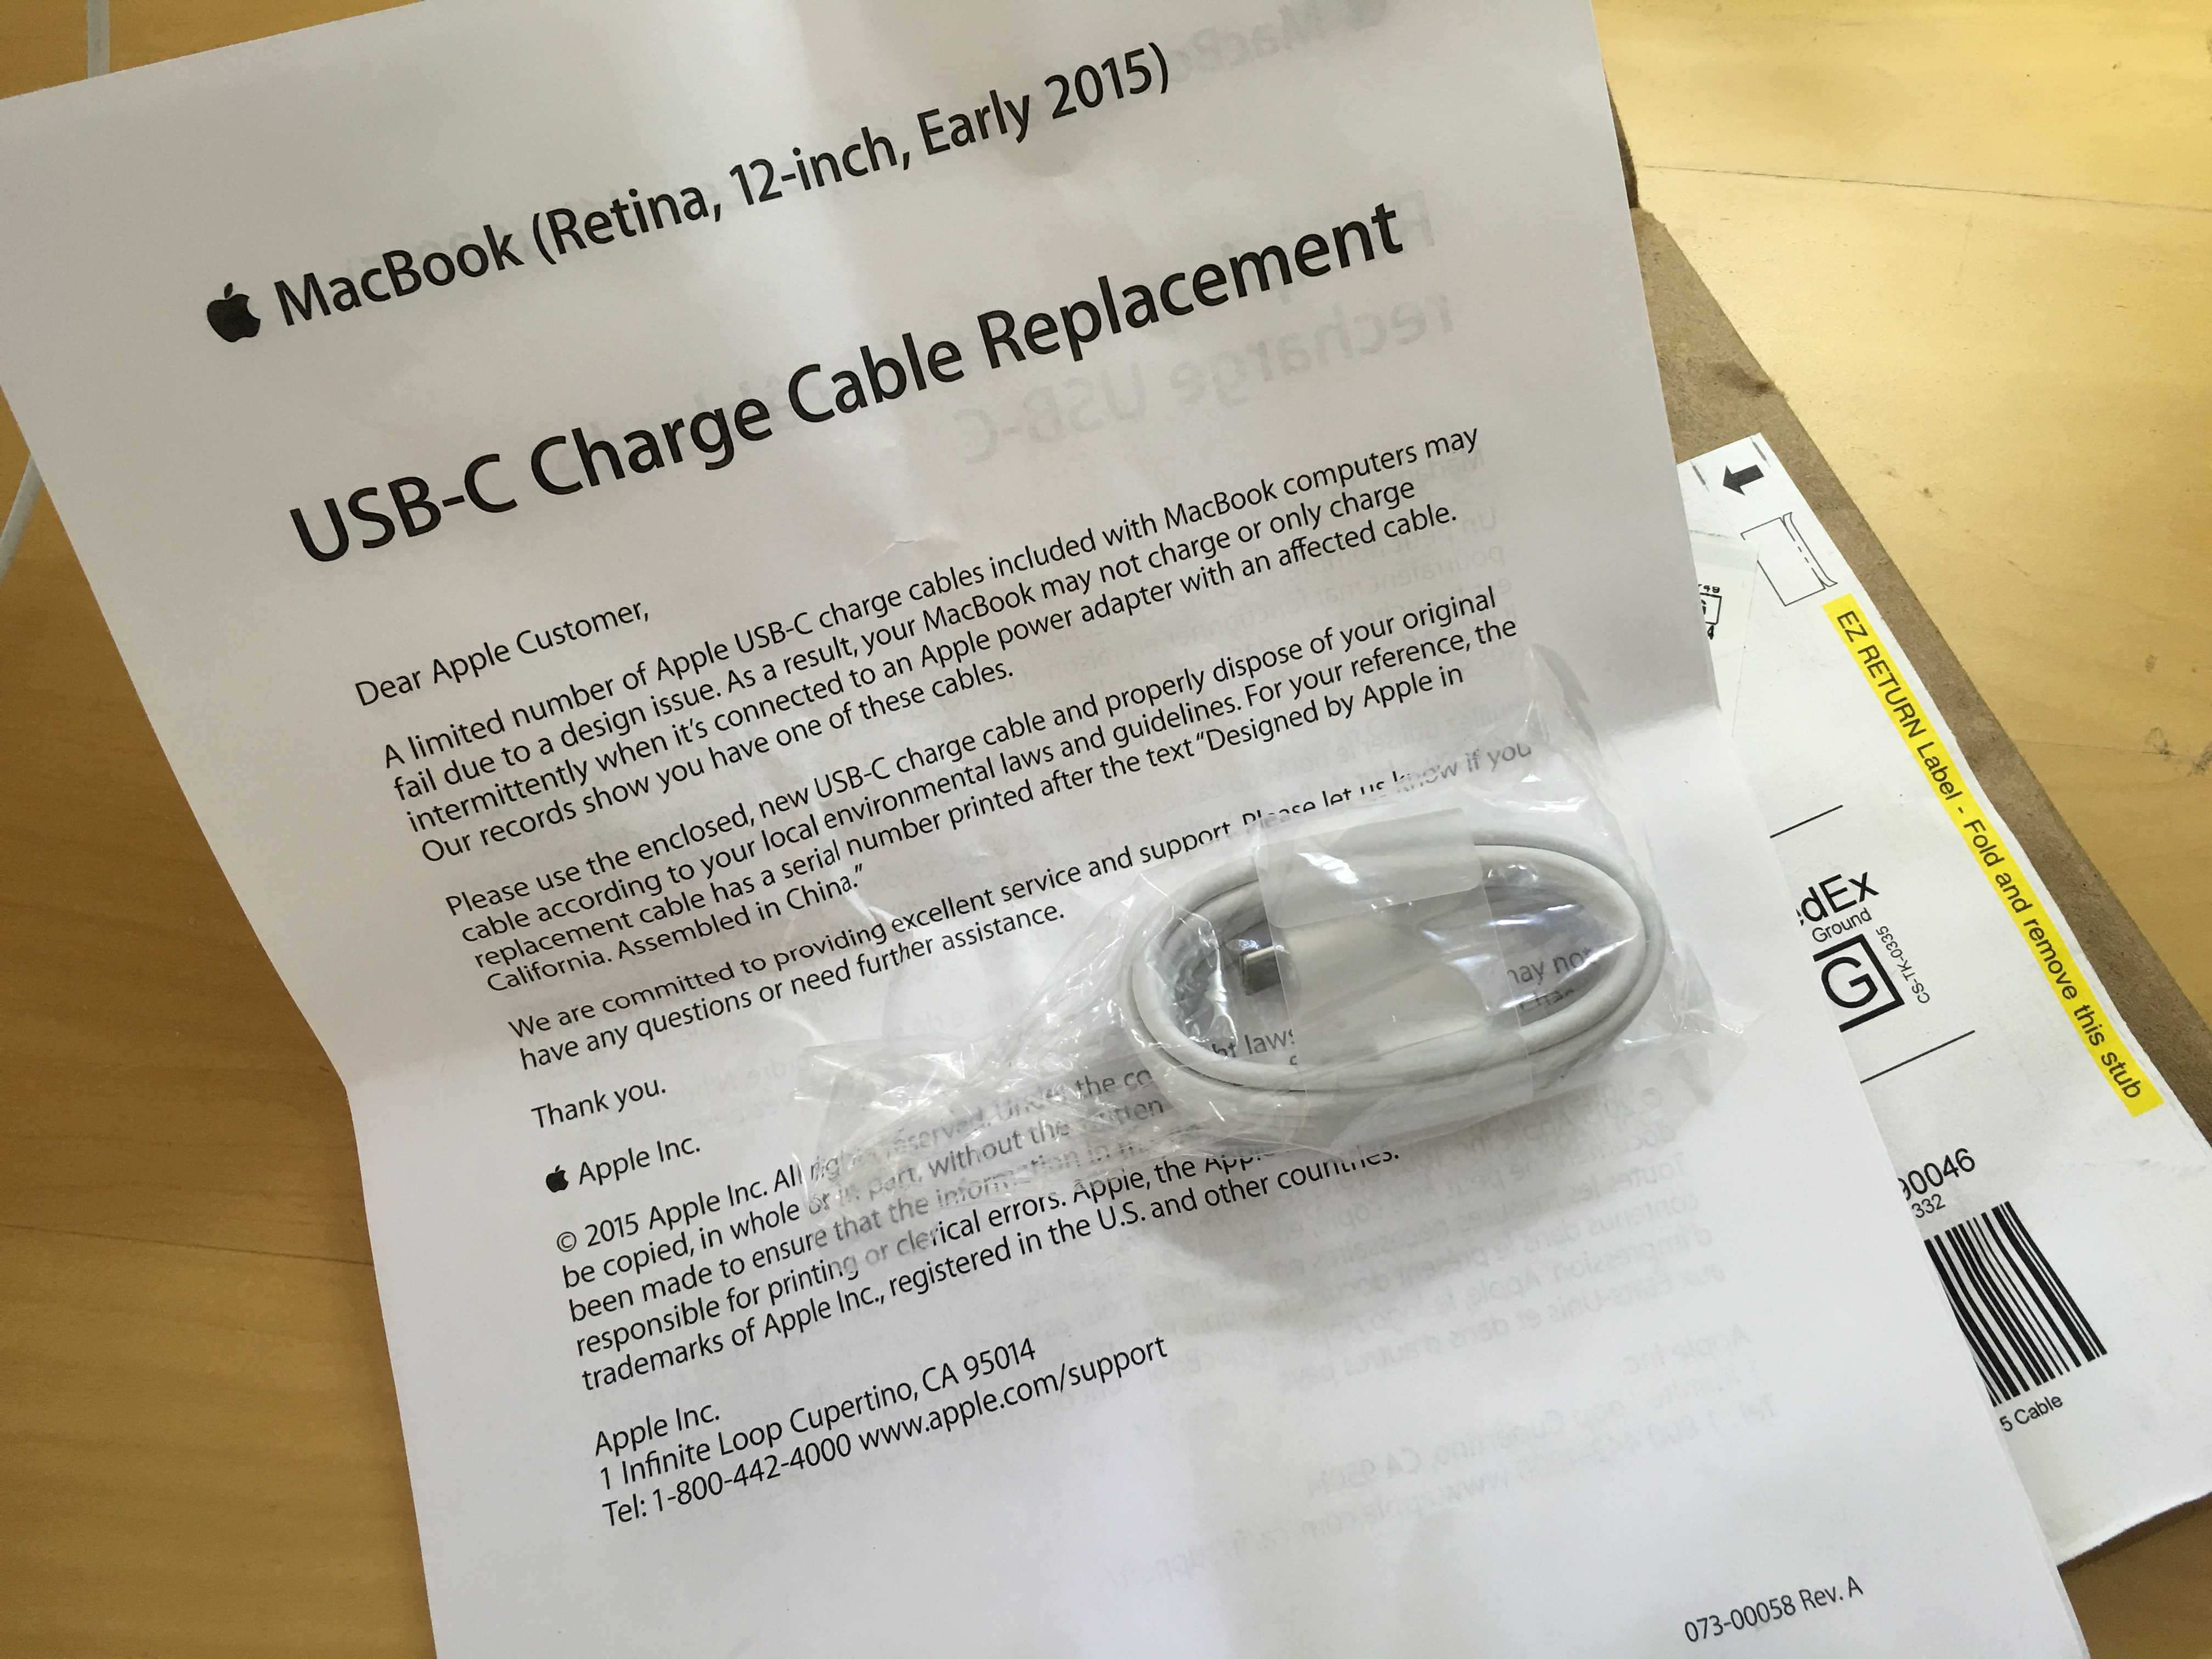 New USB-C cables are on their way.